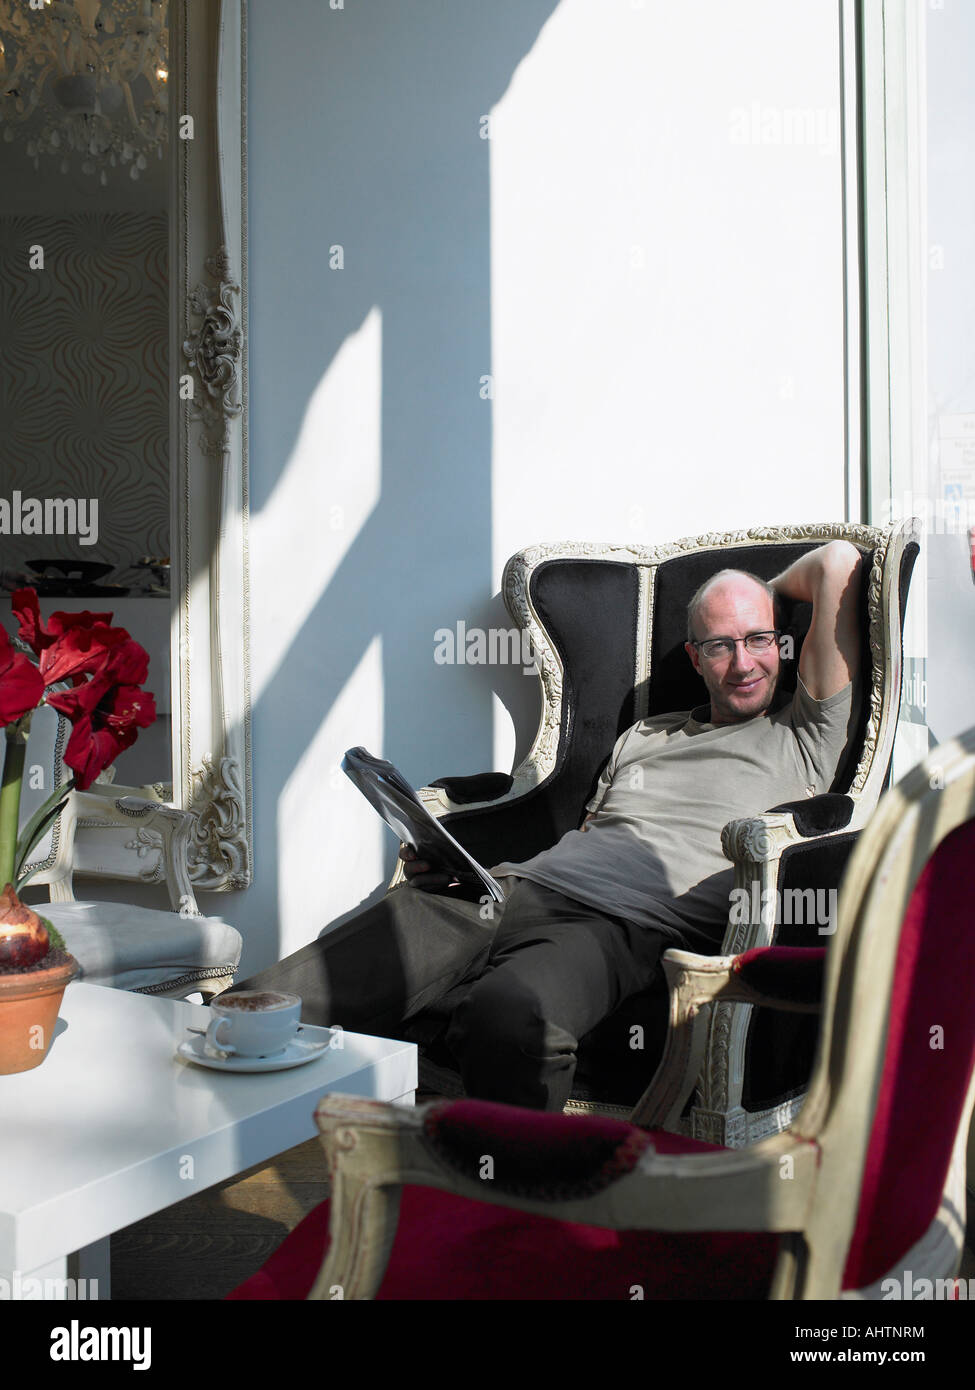 Man relaxing in armchair in cafe, smiling, portrait Banque D'Images